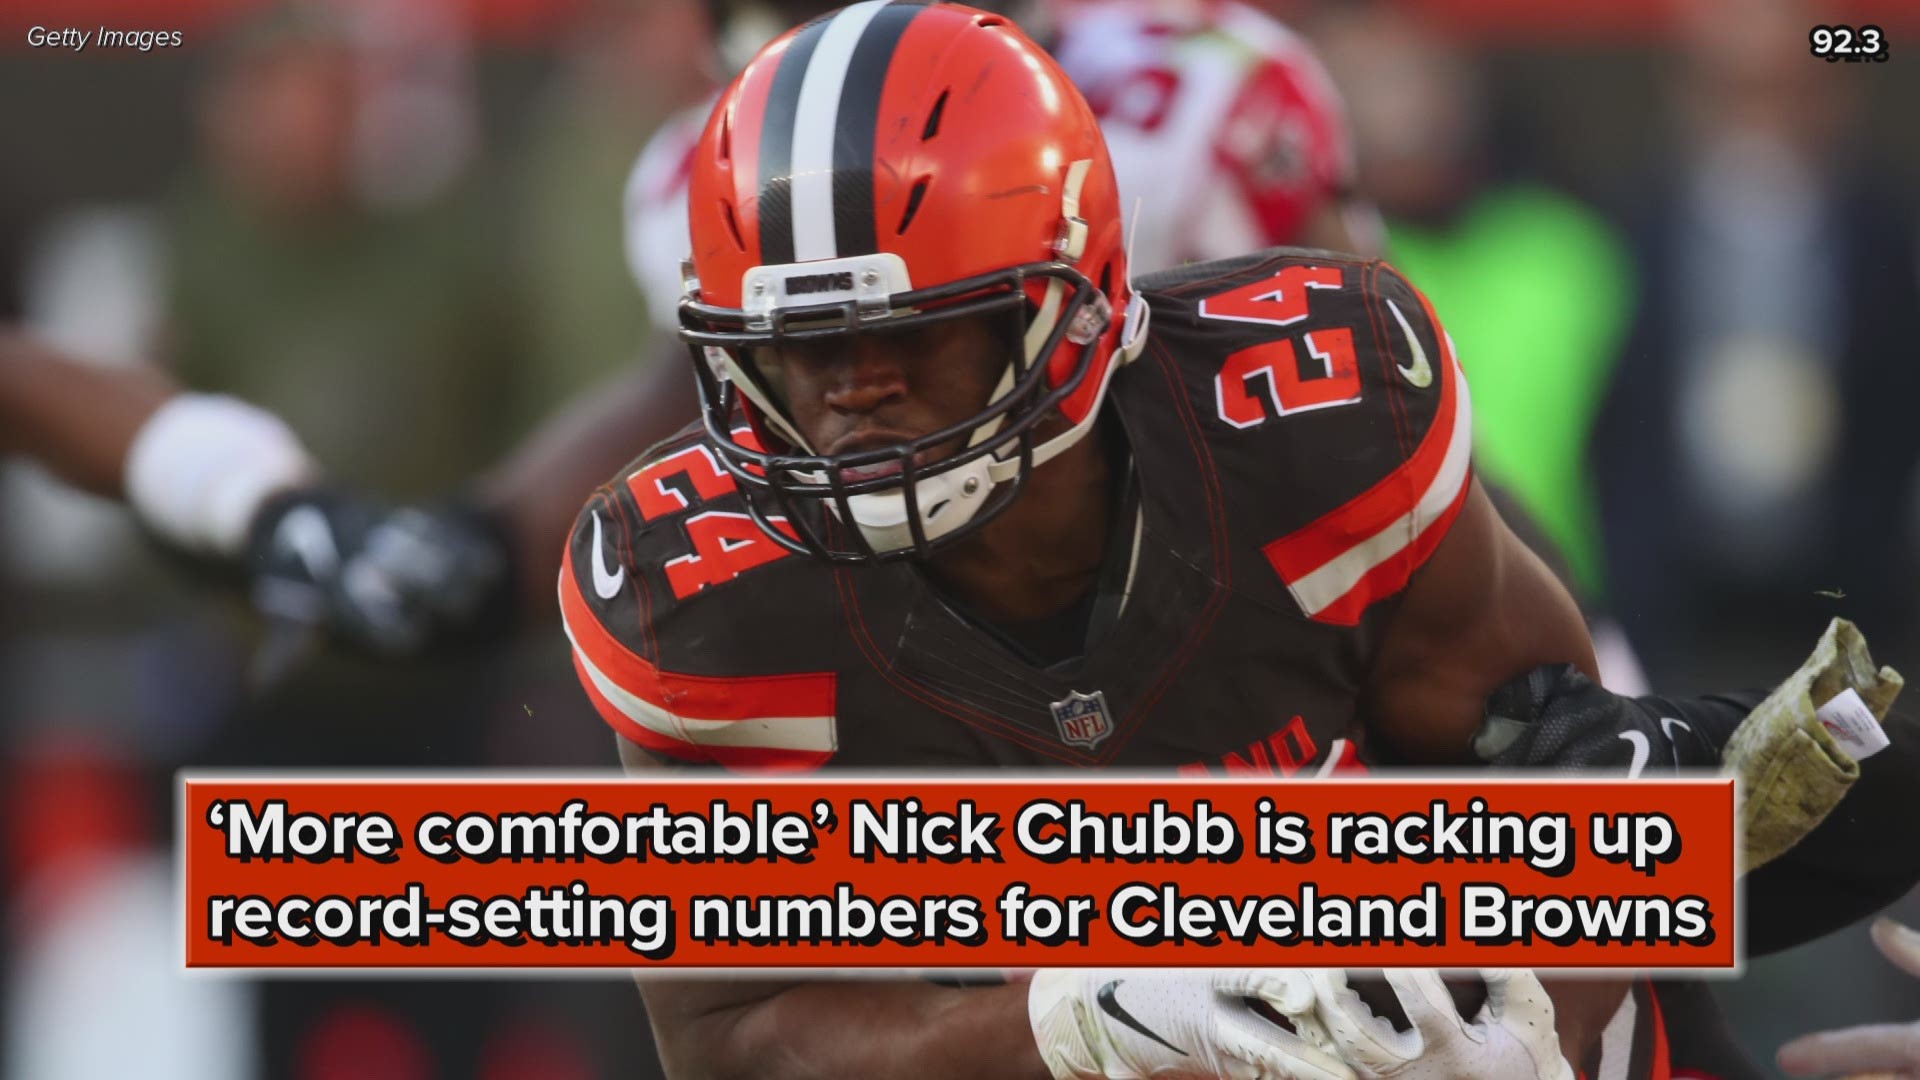 'More comfortable' Nick Chubb is racking up record-setting numbers for Cleveland Browns